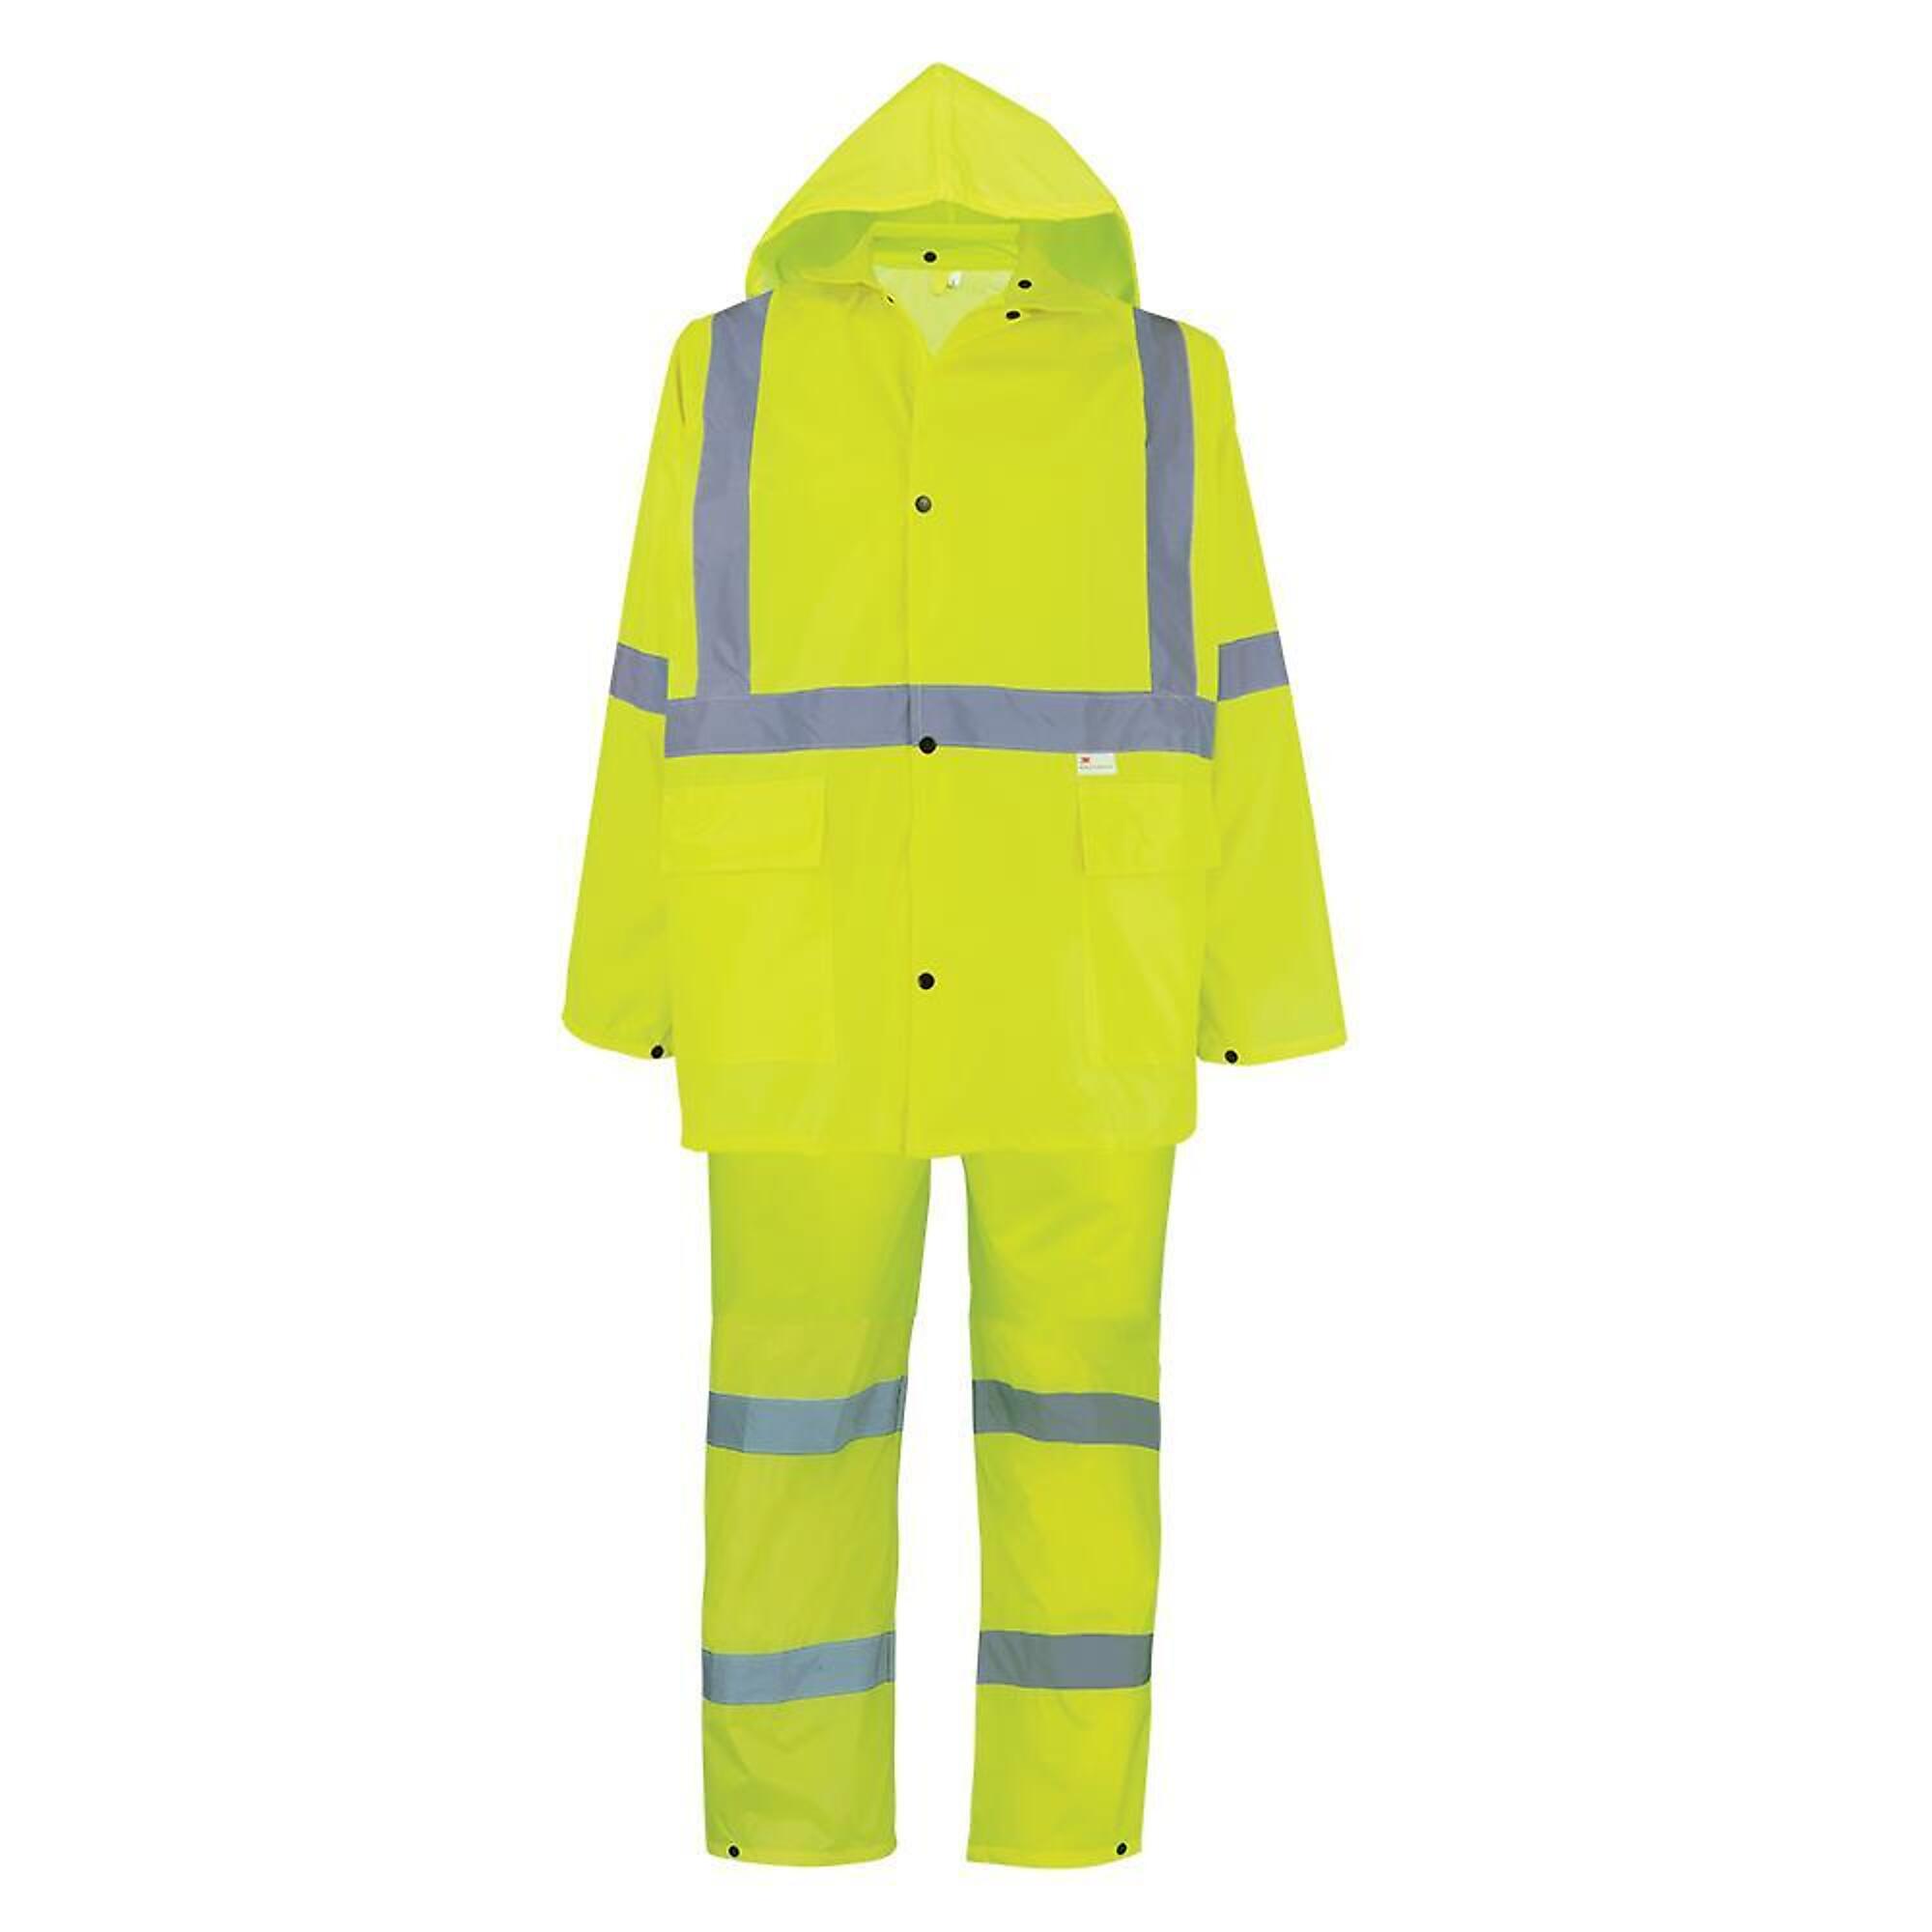 FrogWear, HV Yellow/Green, Class 3 Three-Piece Rain Suit, Size M, Color High-Visibility Yellow/Green, Model GLO-8000-M